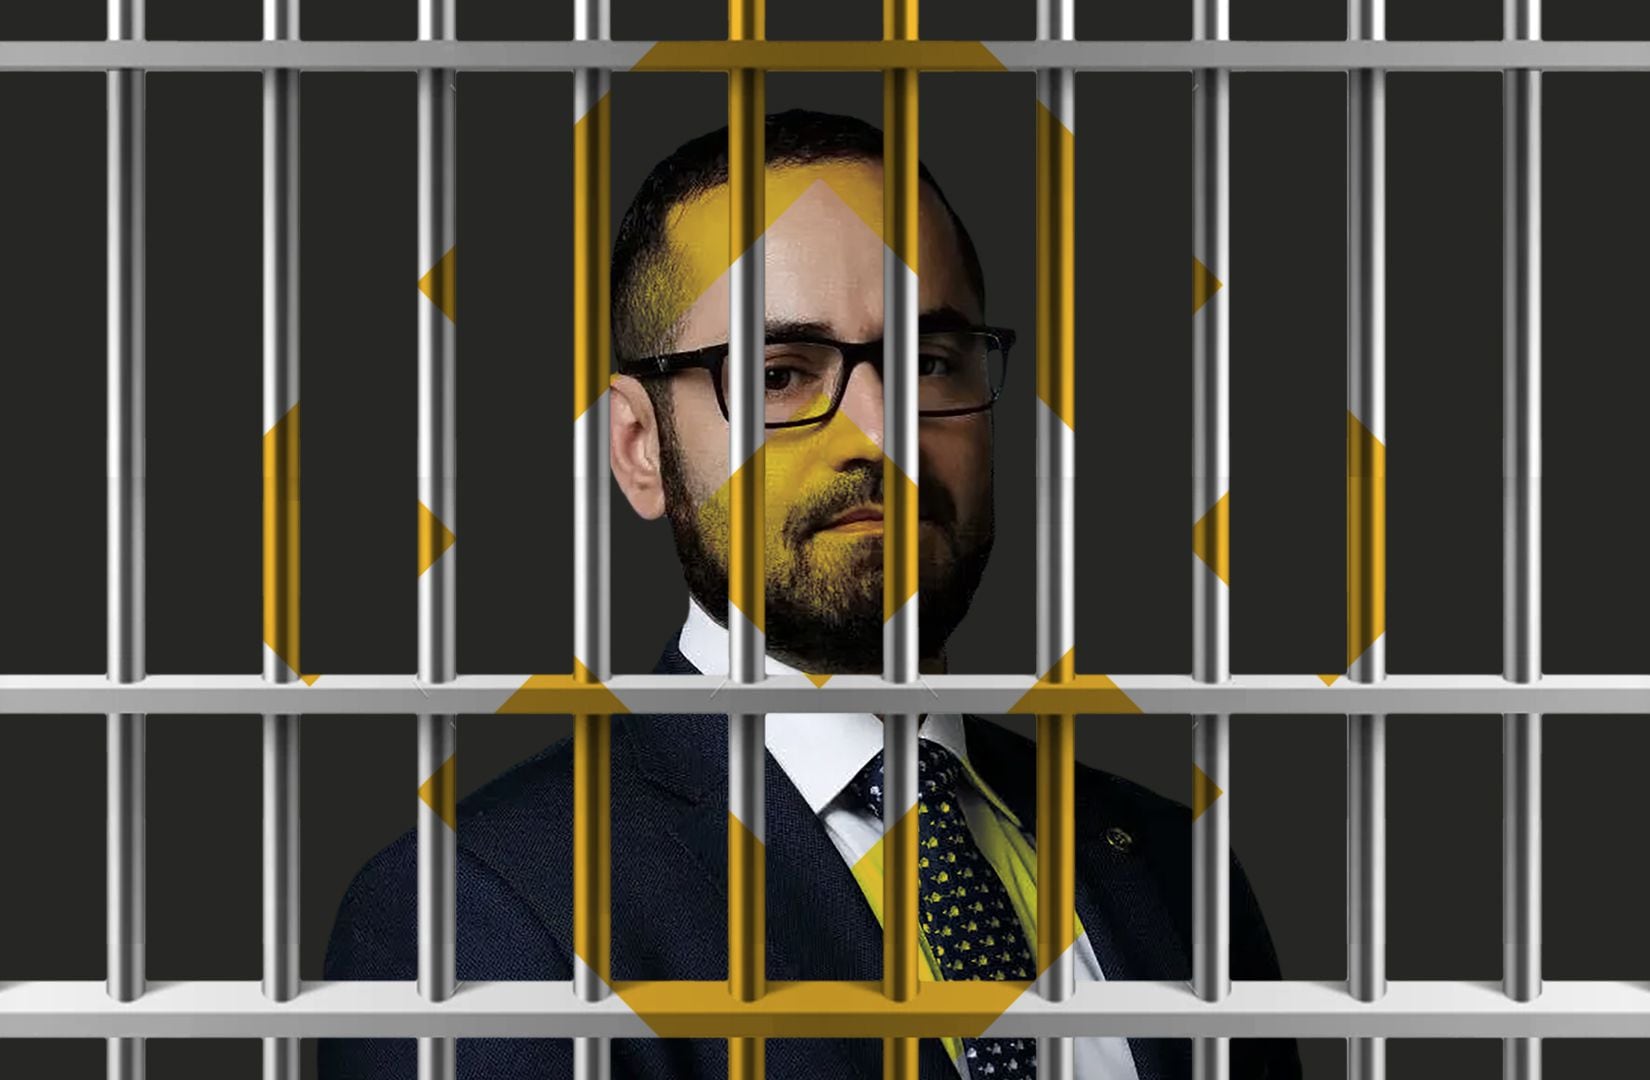 Binance exec to spend 100 days in Nigerian custody without a bail ruling as trial looms